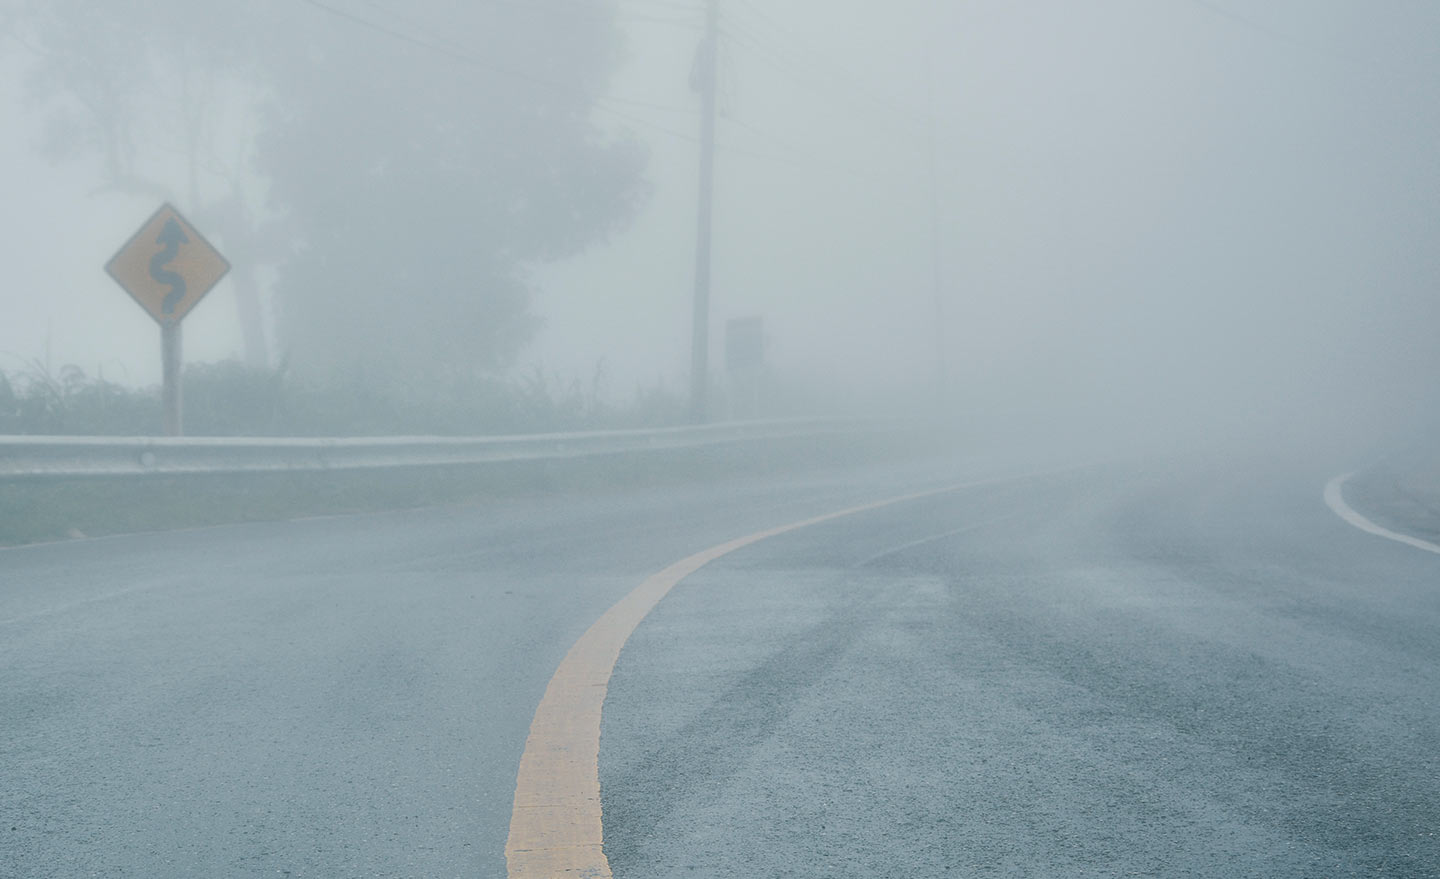 Driving In Fog - Guide To Driving In Hazardous Conditions